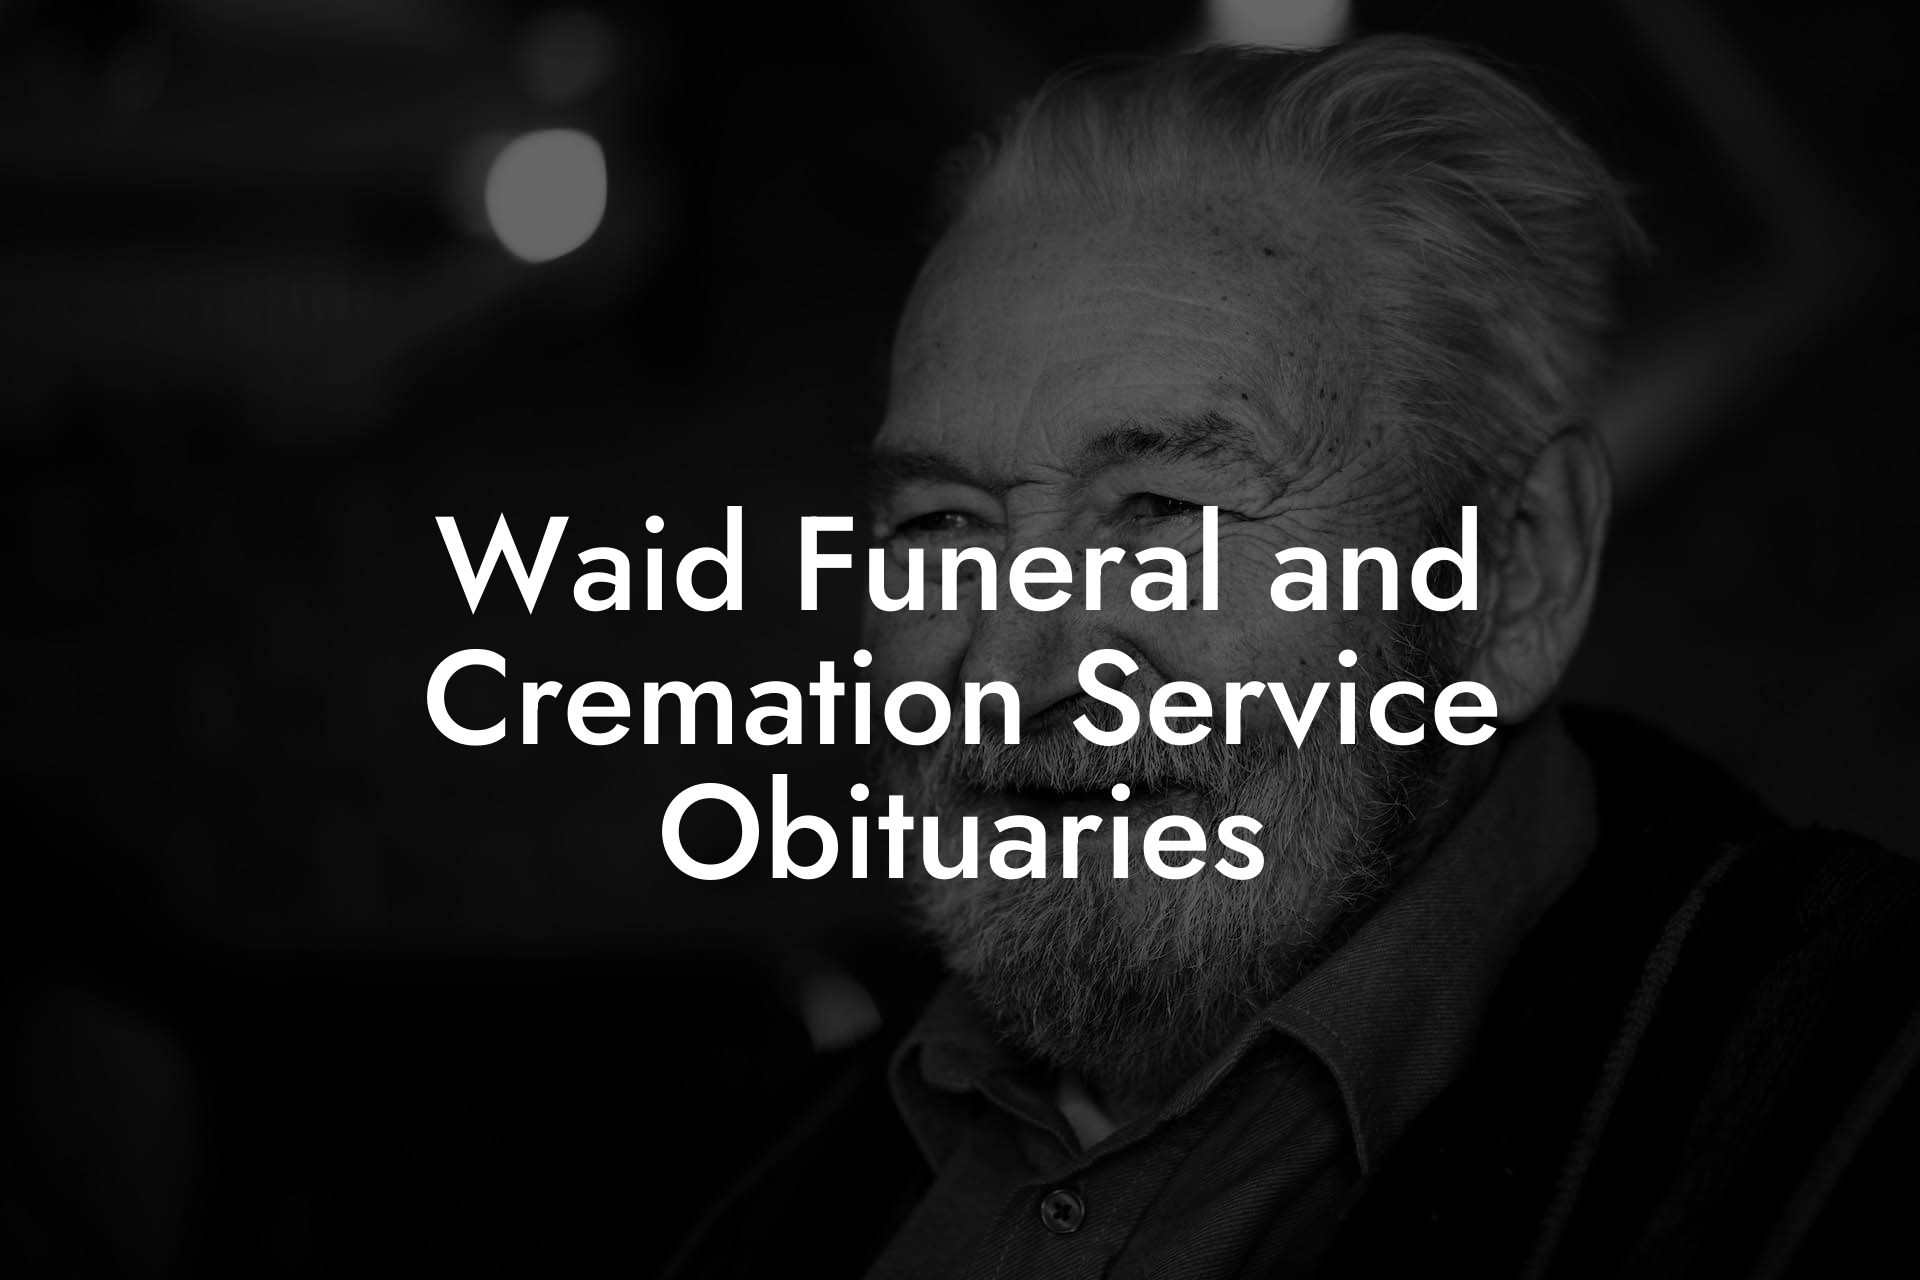 Waid Funeral and Cremation Service Obituaries